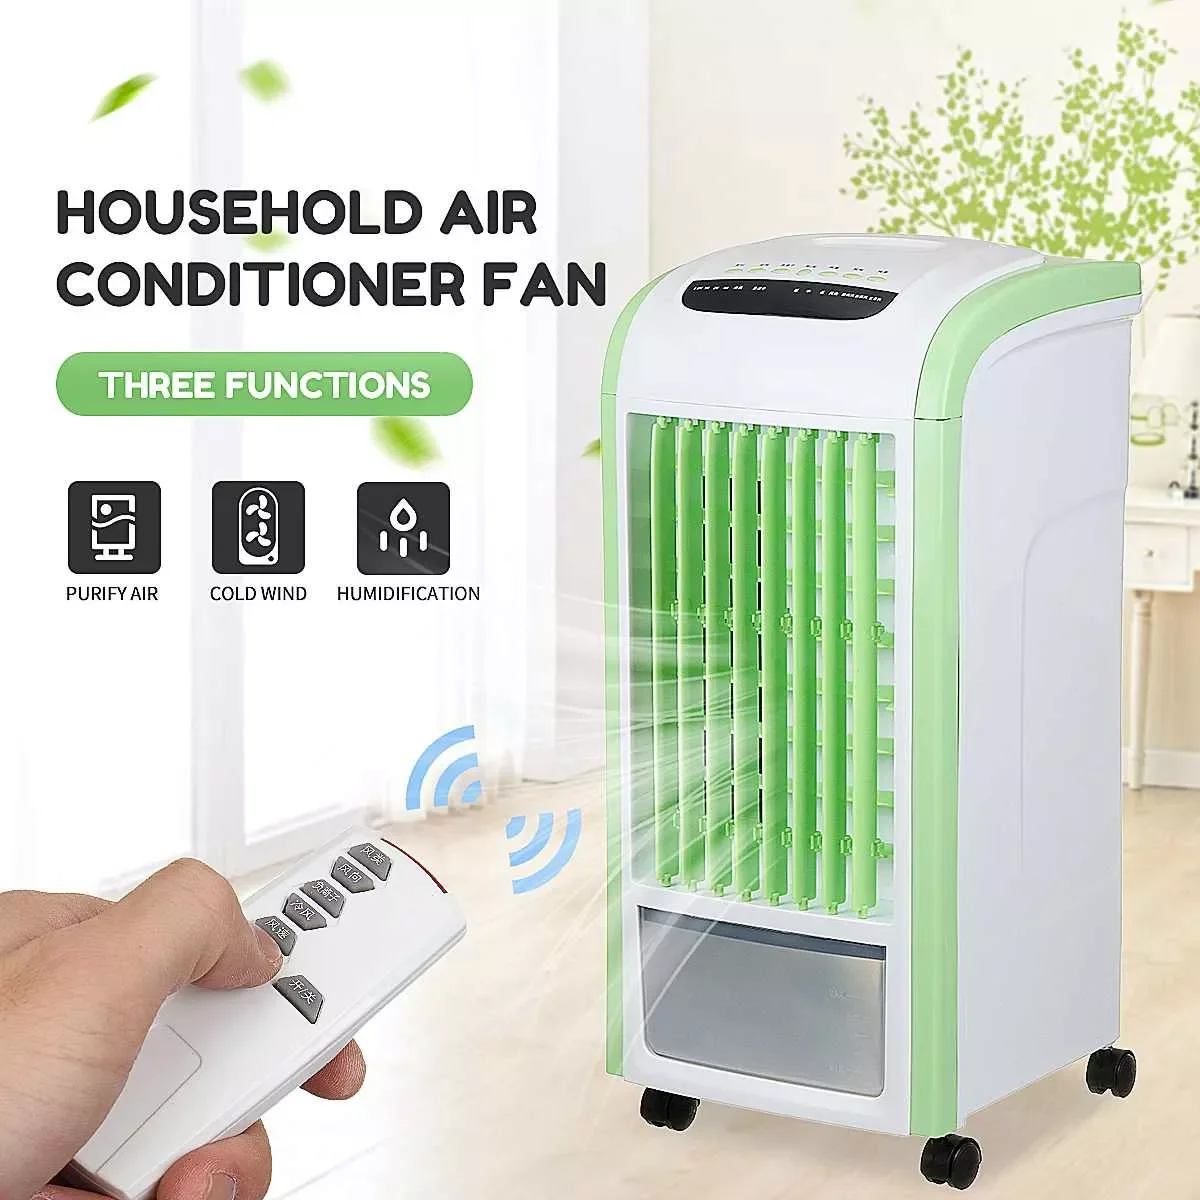 220V 60W Portable Air Conditioner Conditioning Fan Humidifier Cooler Remote Control Air Conditioner Cooling Fan+5 Ice Crystal